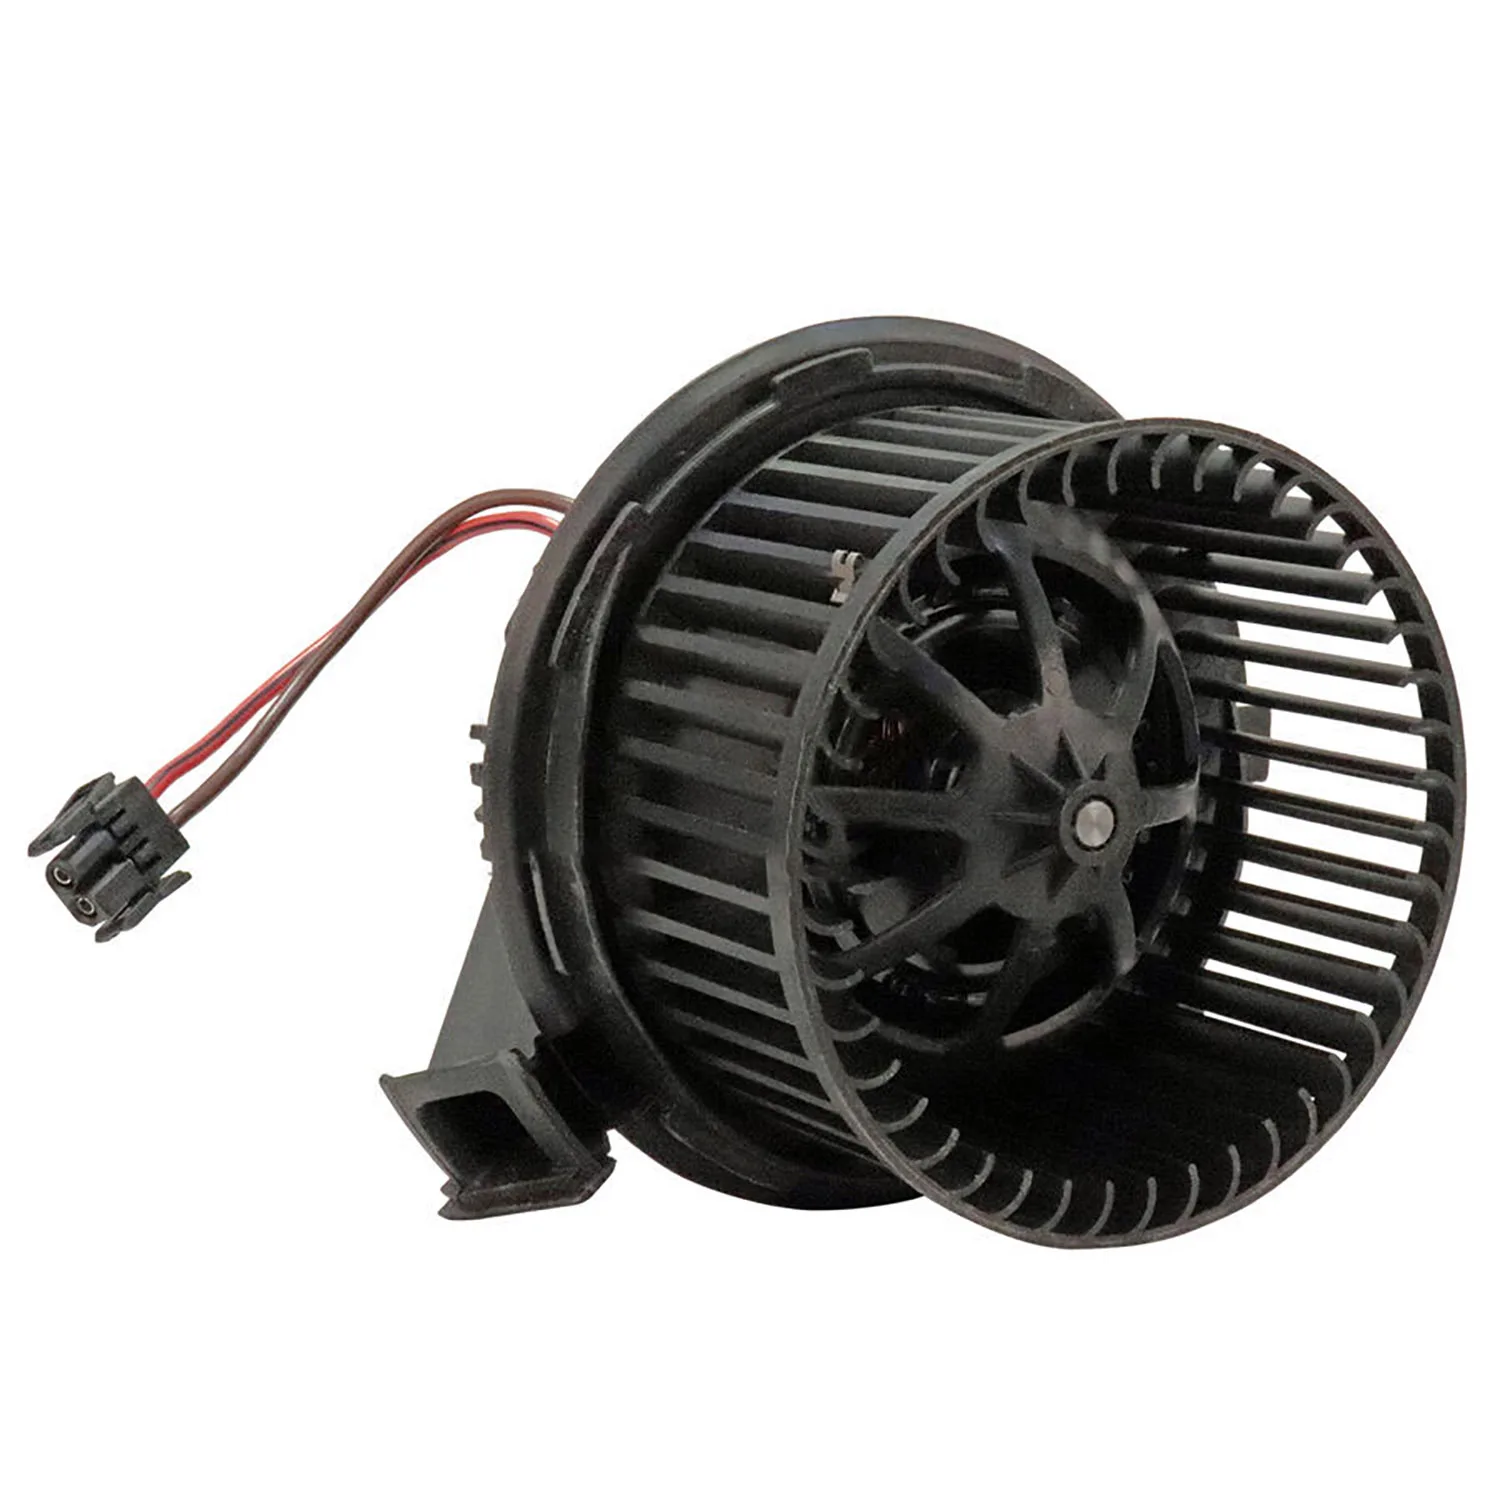 

Air Conditioning Fan AC A/C Blower Motor FOR ISZ 12V MZZ0216 0130101623 MZZ0216CD MZZ0216GS MZZ0216WB MZZ0216YD